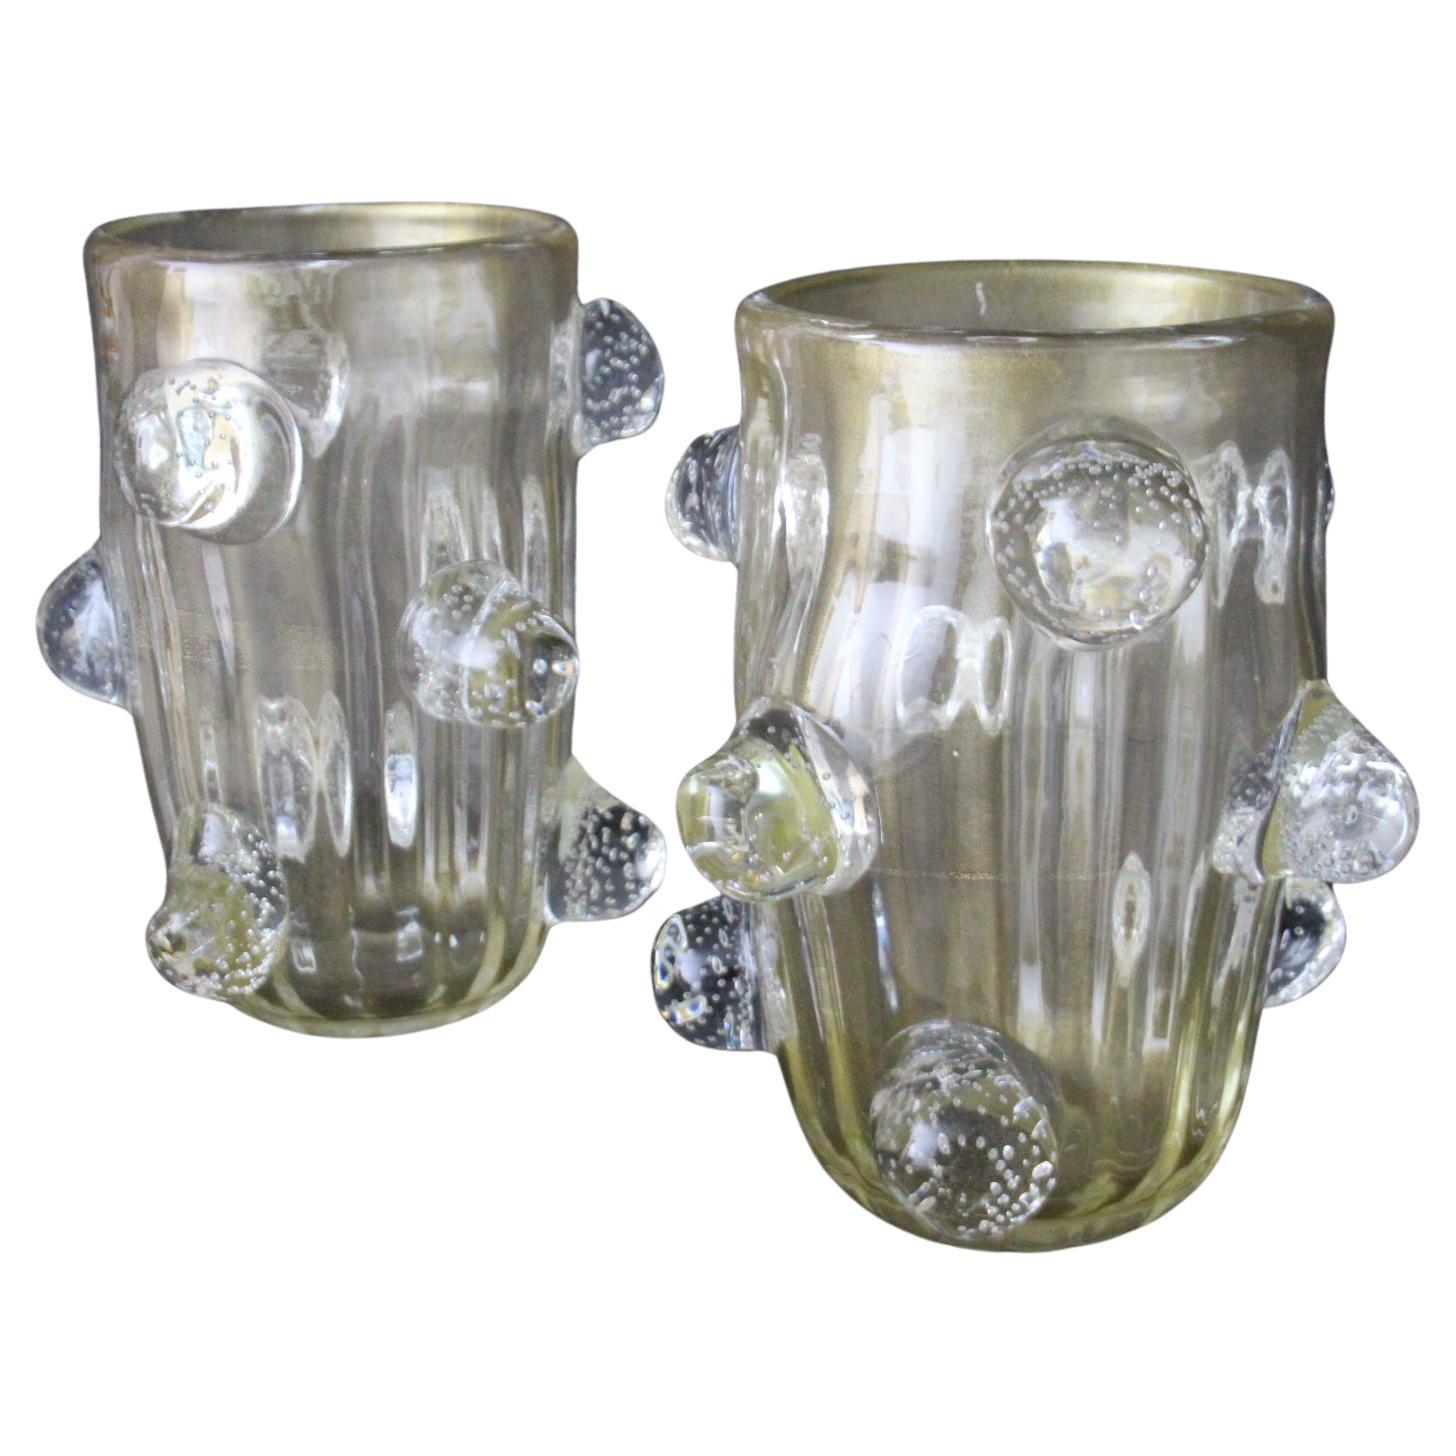 This spectacular pair of vases has got a very unusual golden color that goes from deep beige to light gold according to surrounding colors and light. This special effect is due to gold dust inclusions in glass.Glass is very deep and each bubble